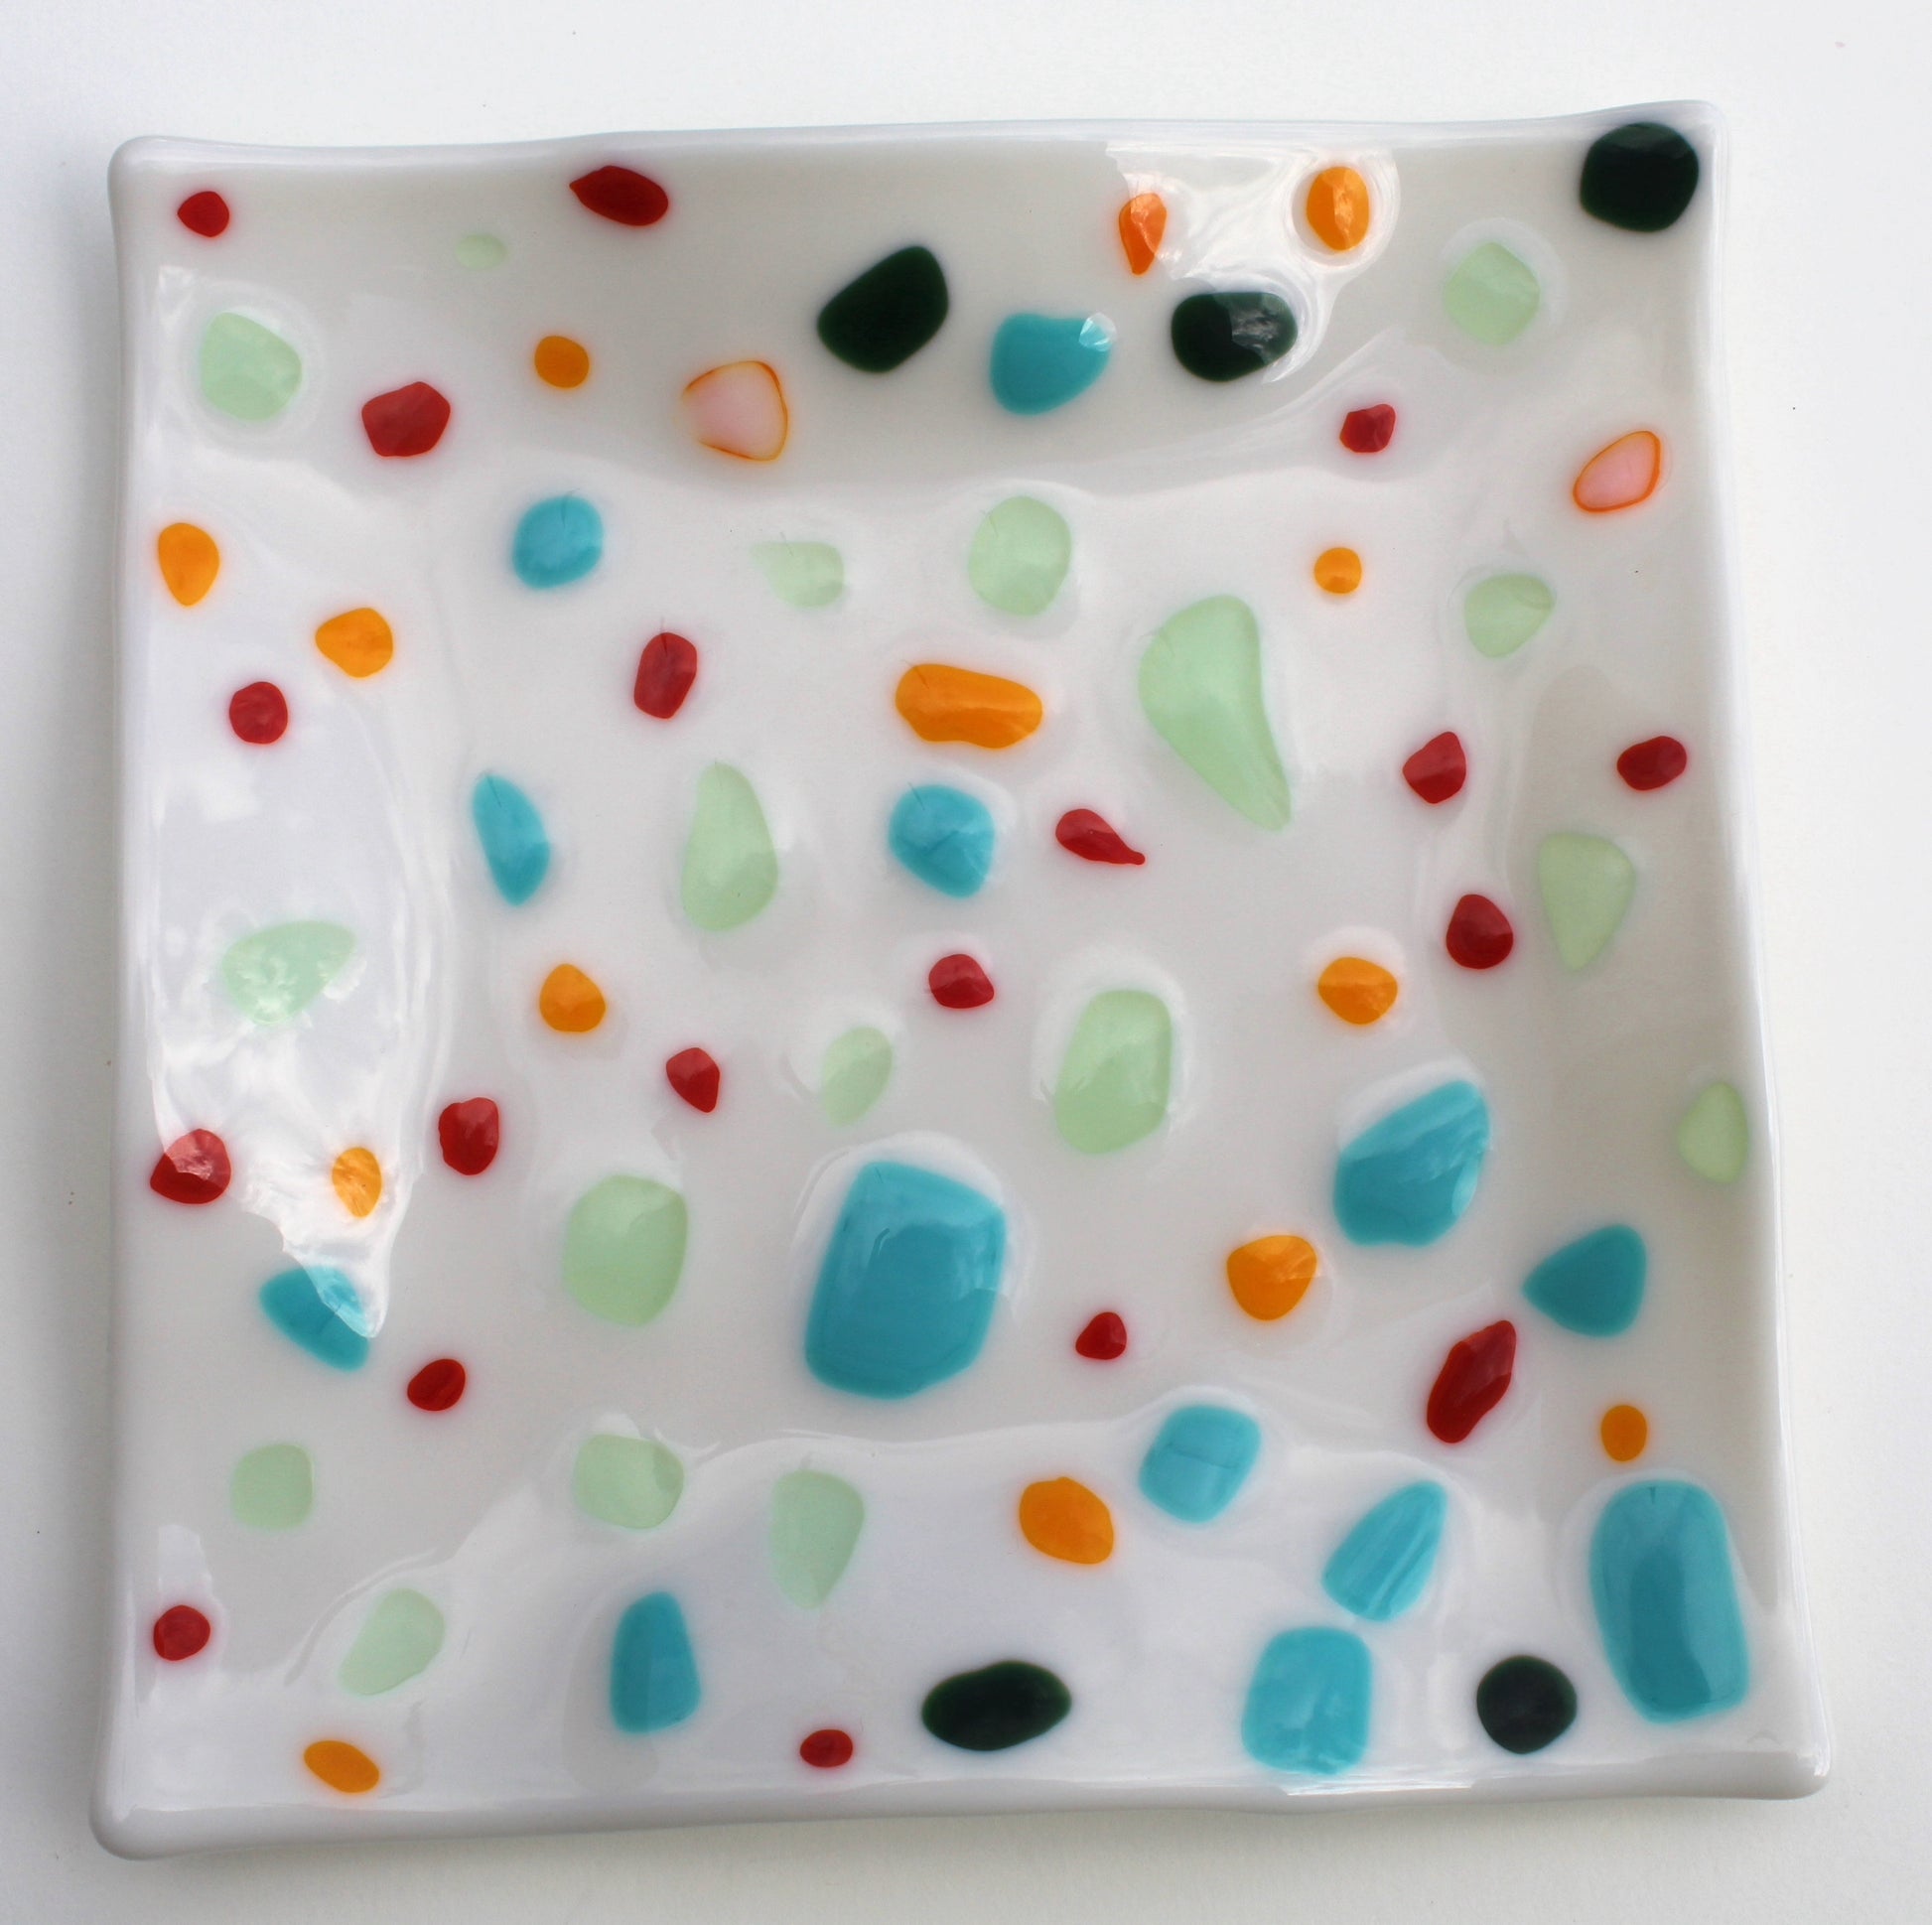 This is a white glass art piece in the shape of a square. It has multicolored blotches of blue, pale green, red, black, and orange,